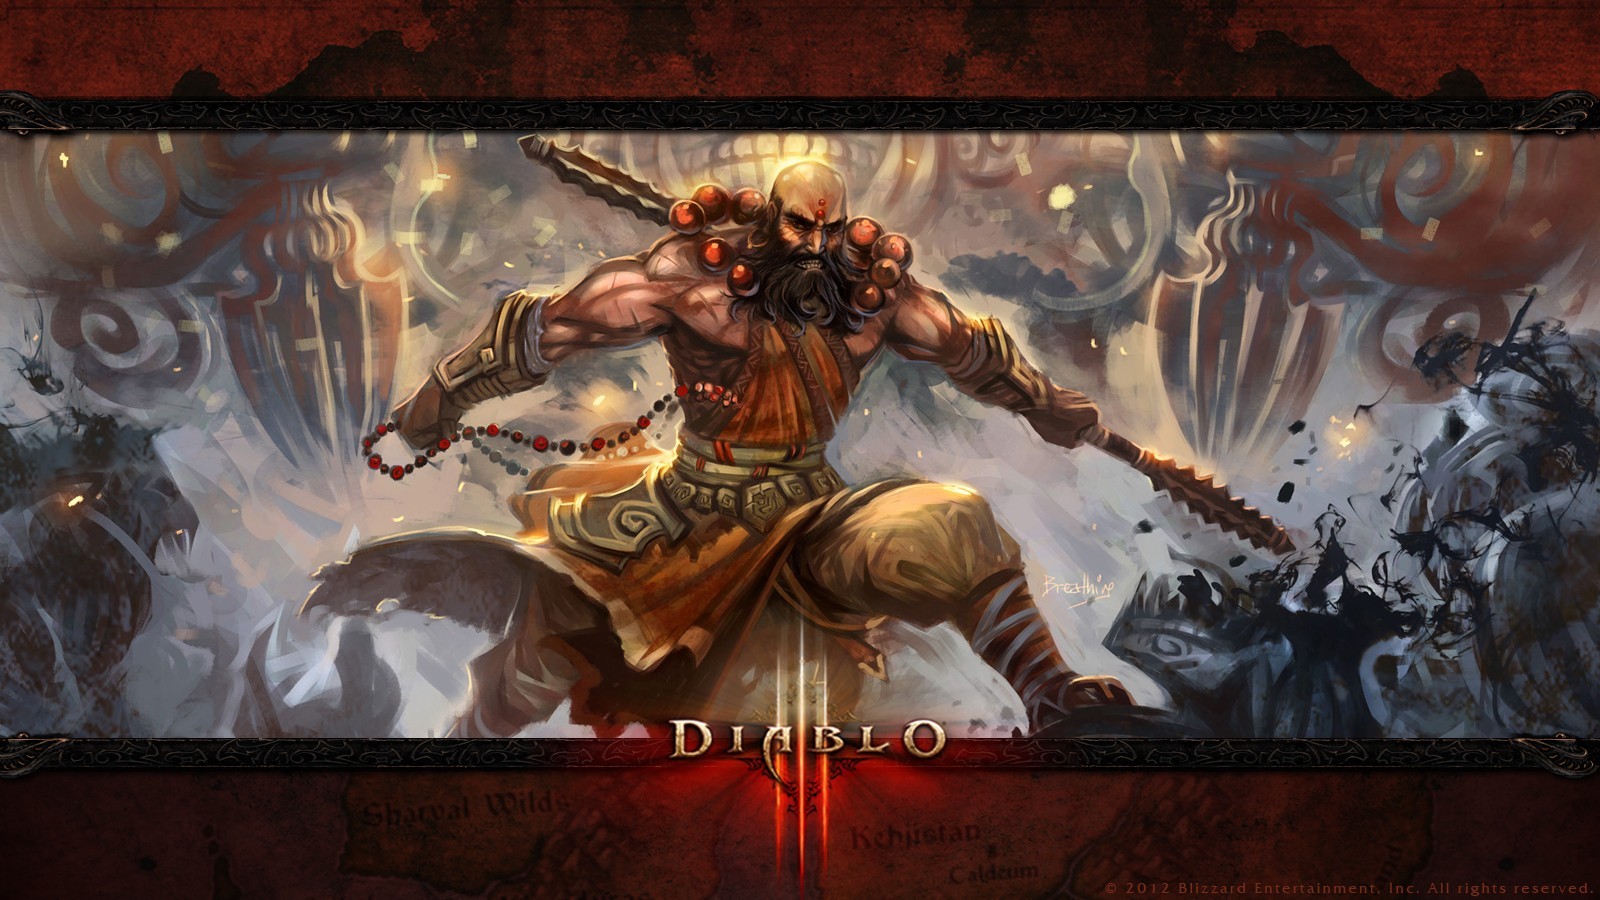 Download Now Diablo 3 Patch to Overhaul Crafting